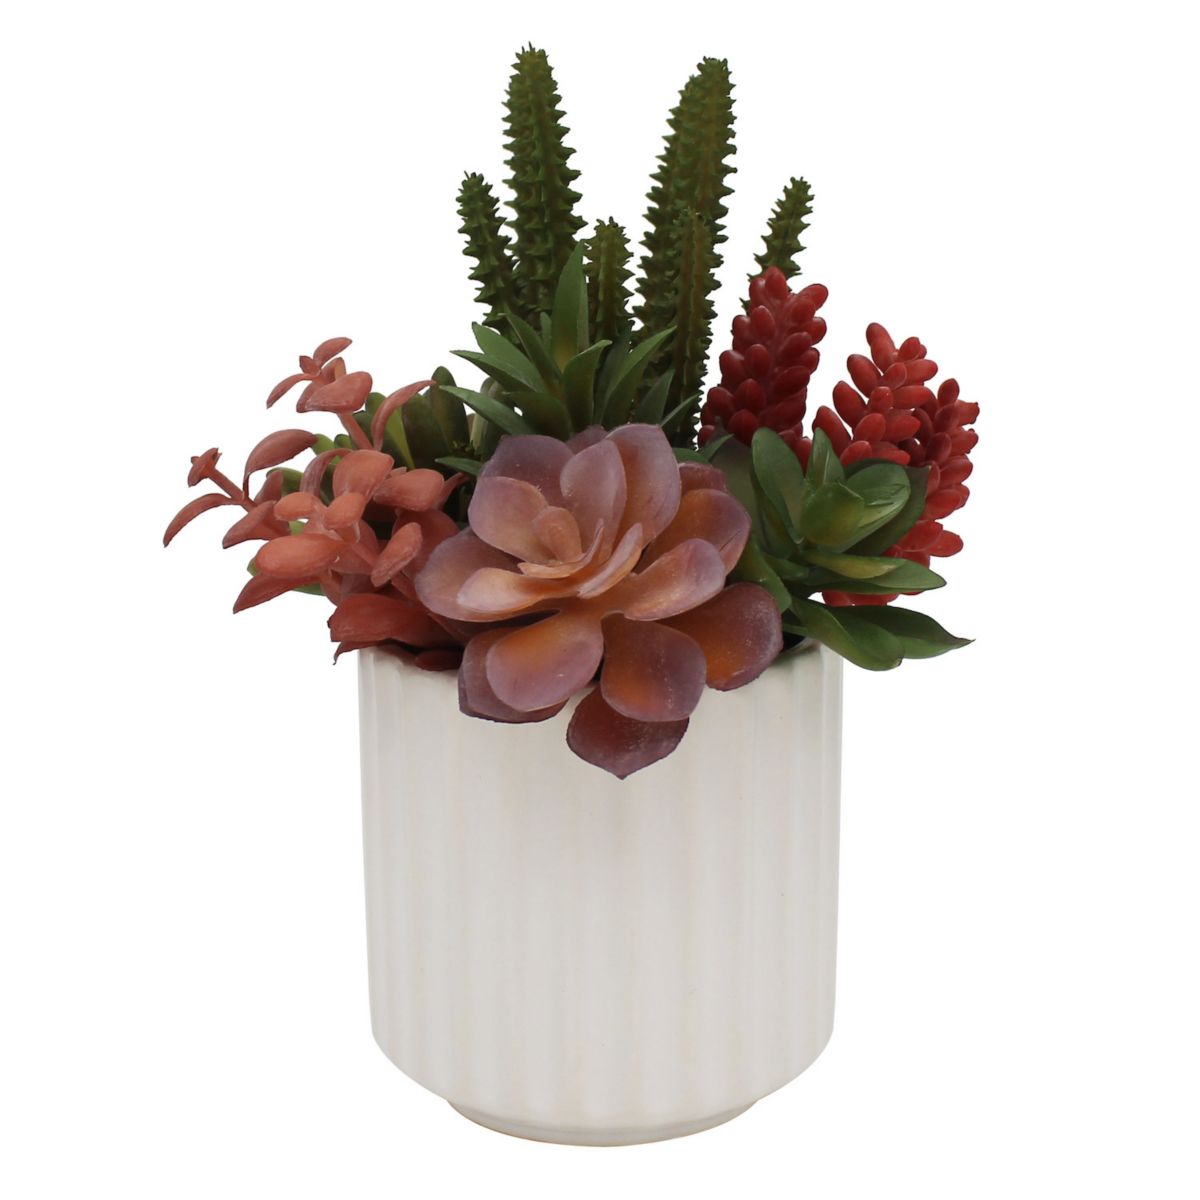 Mixed Succulents In Ceramic Pot Unbranded